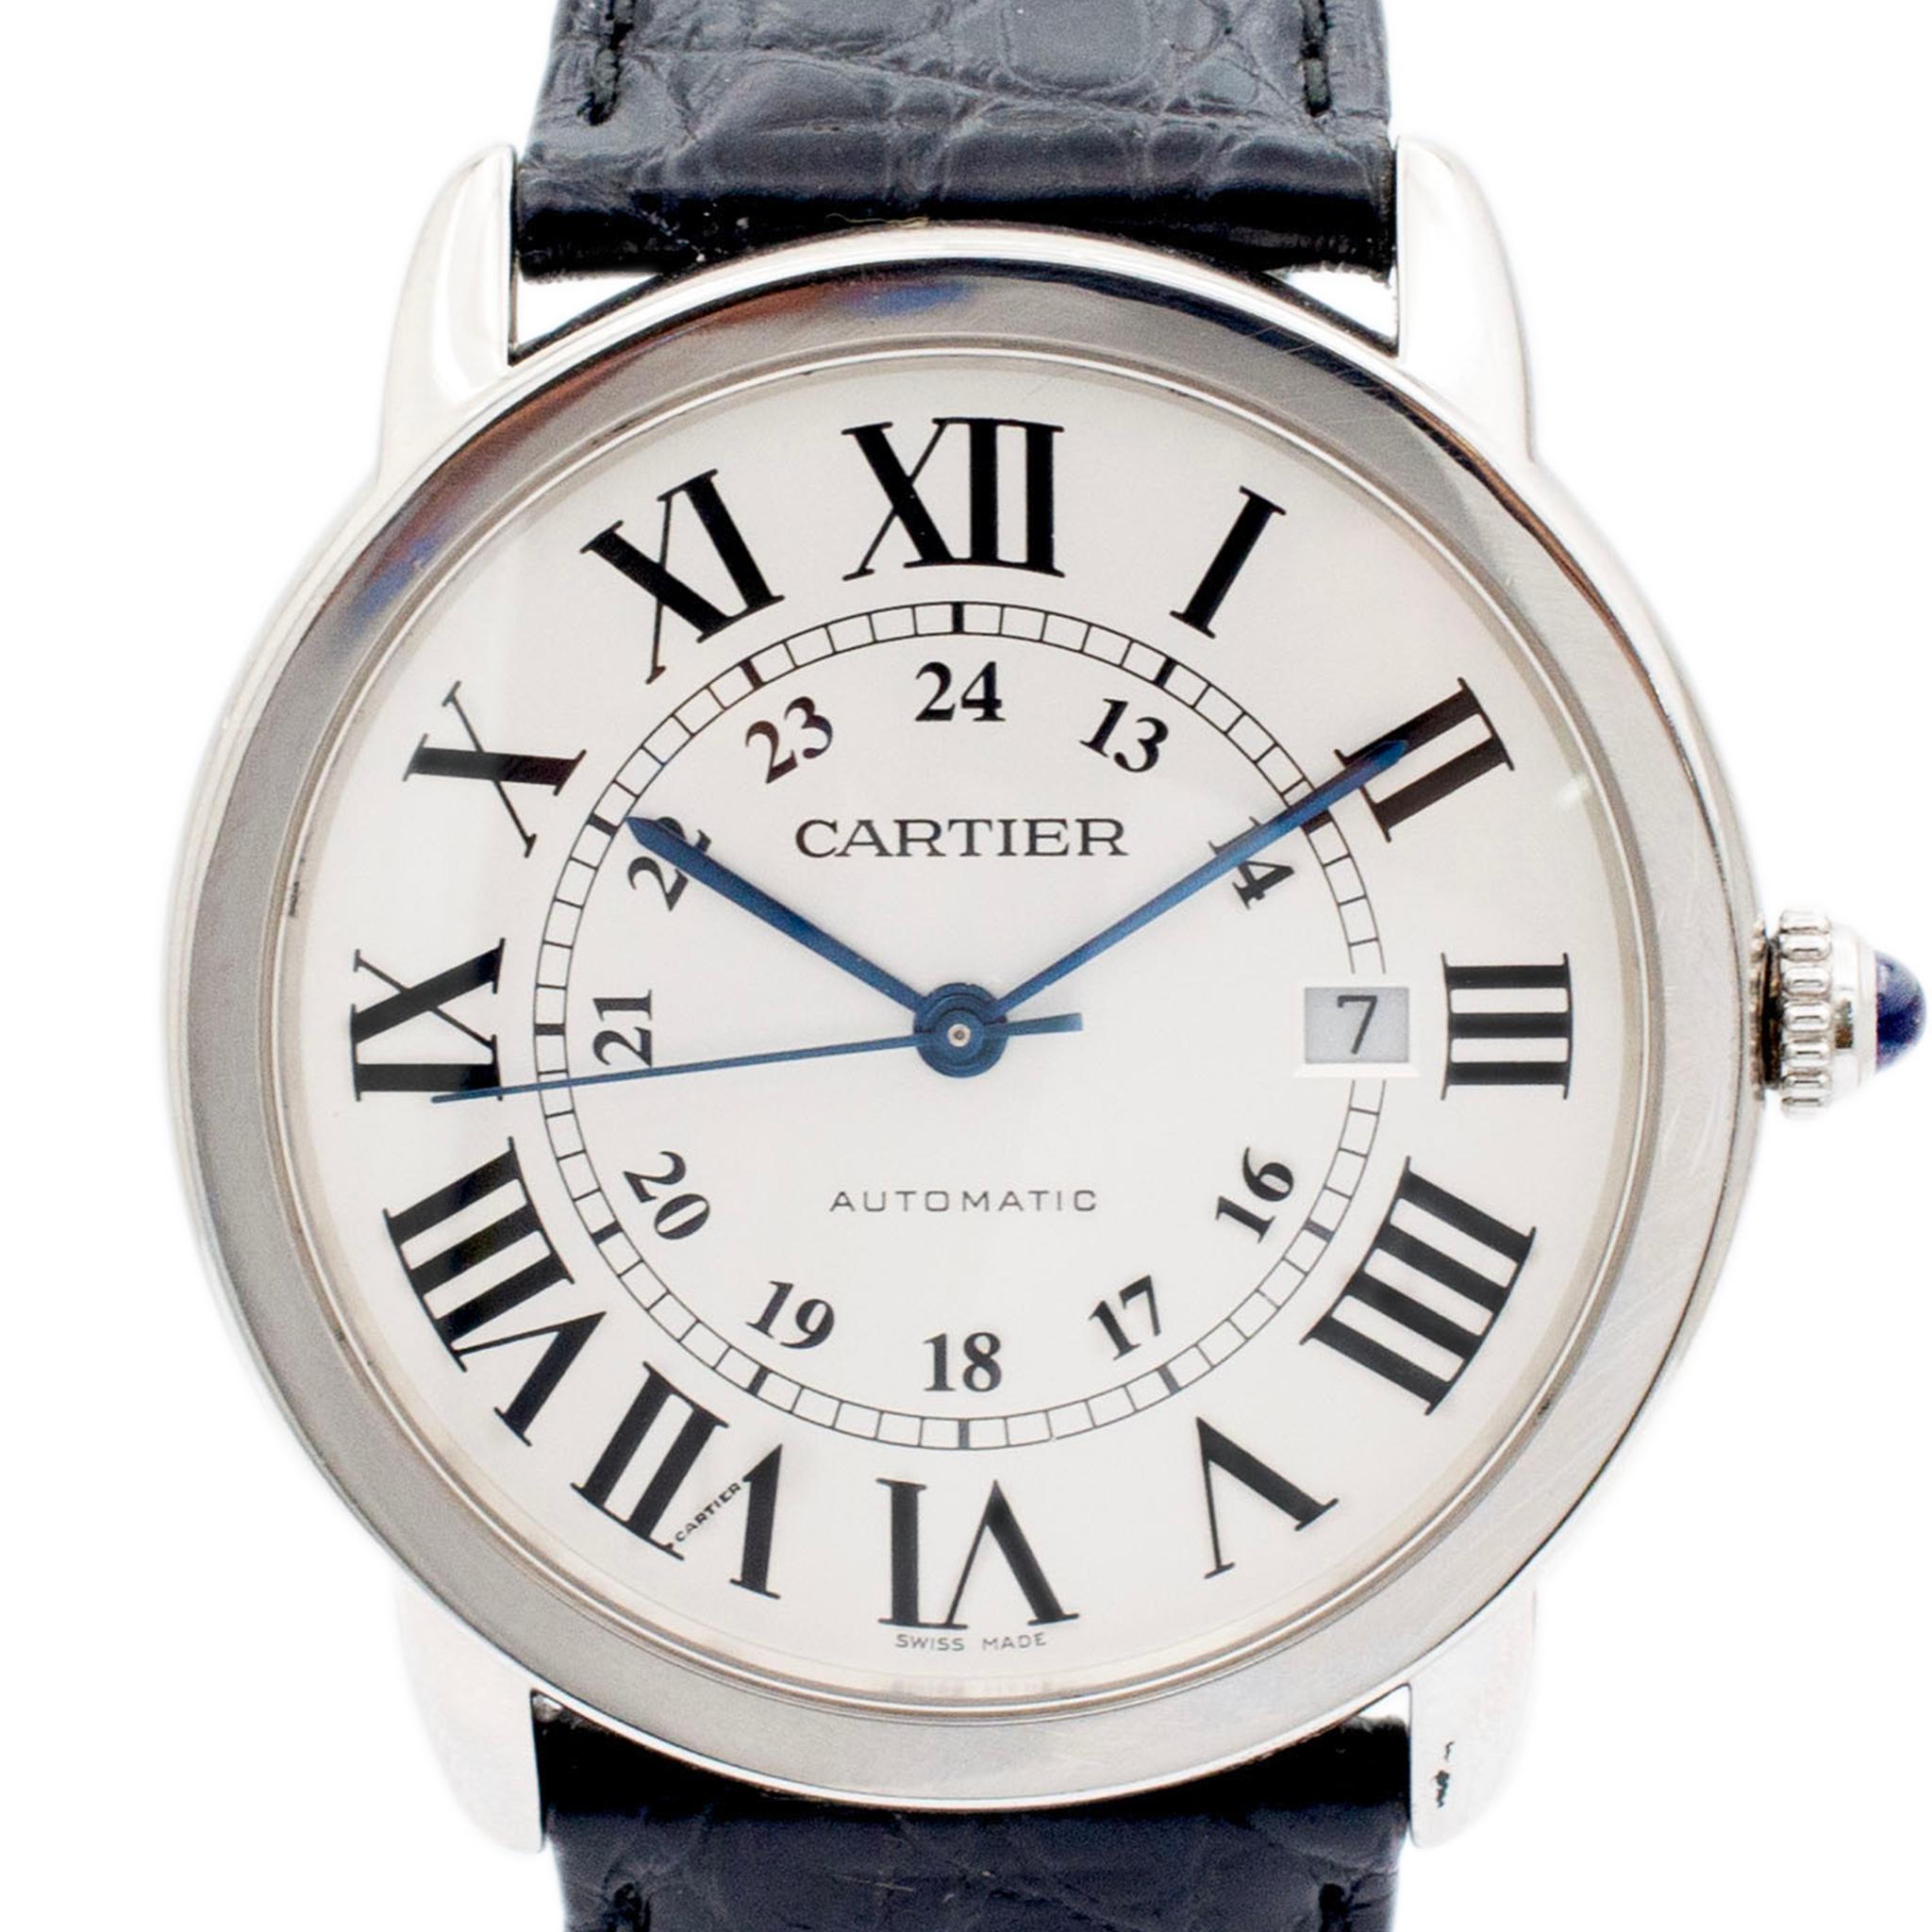 Brand: Cartier

Gender: Mens

Metal Type: Stainless Steel

Diameter: 42MM

Band Length: 70.00 inches

Width: 22.5mm

Weight: 61.32 grams

Gent's stainless steel, Cartier Swiss made watch. The 